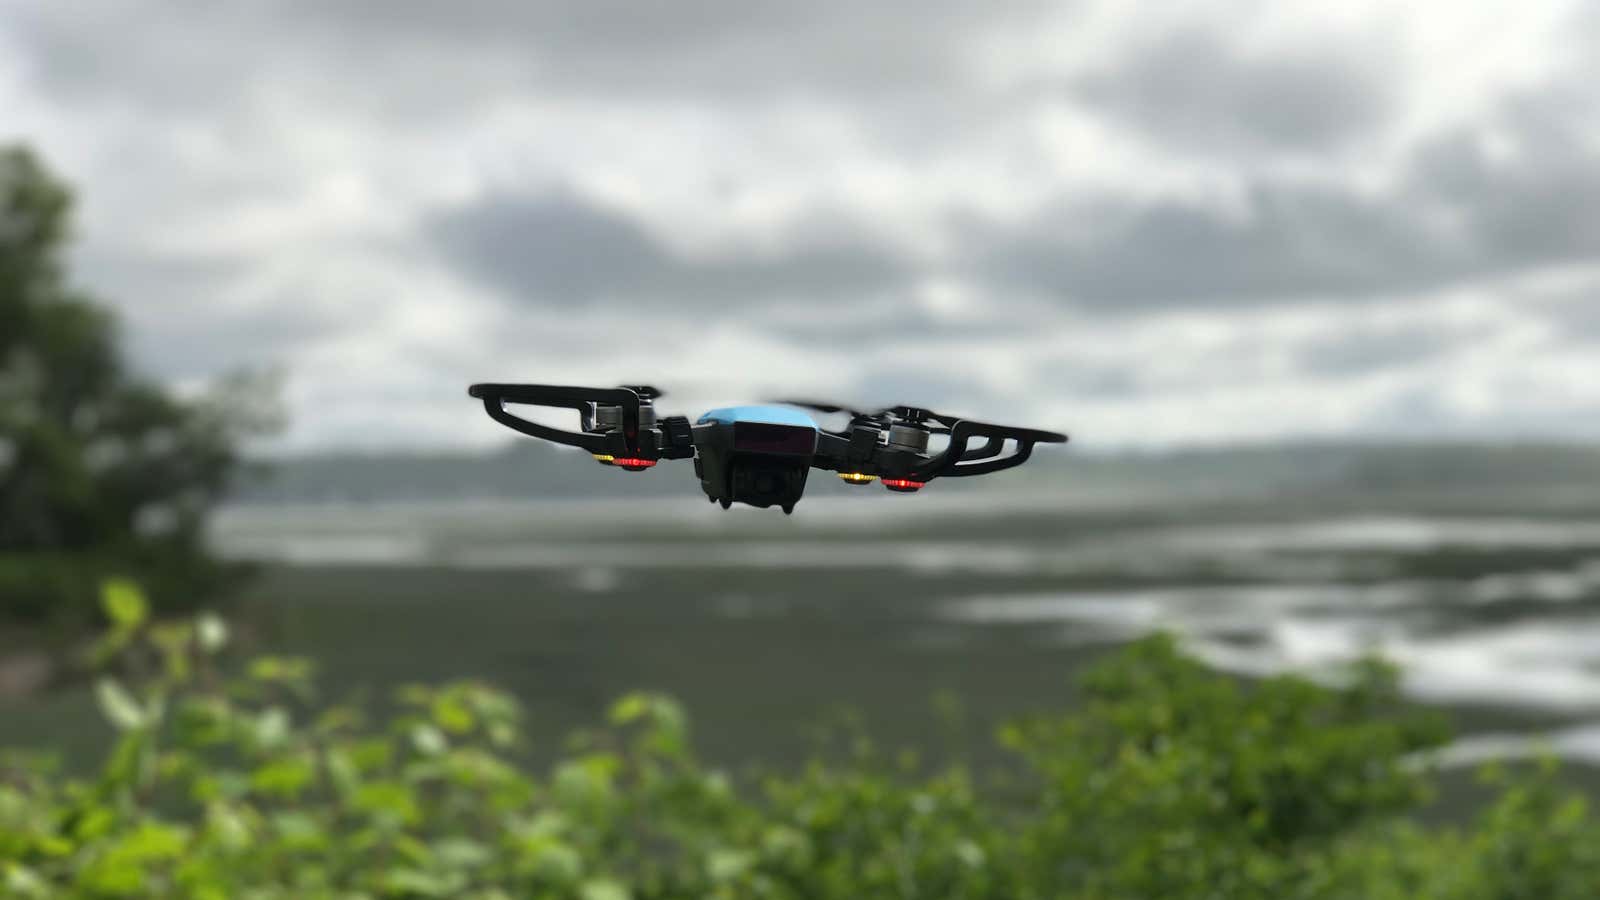 Balehval Ocean teenager DJI Spark review: This might be the first drone for anyone to fly